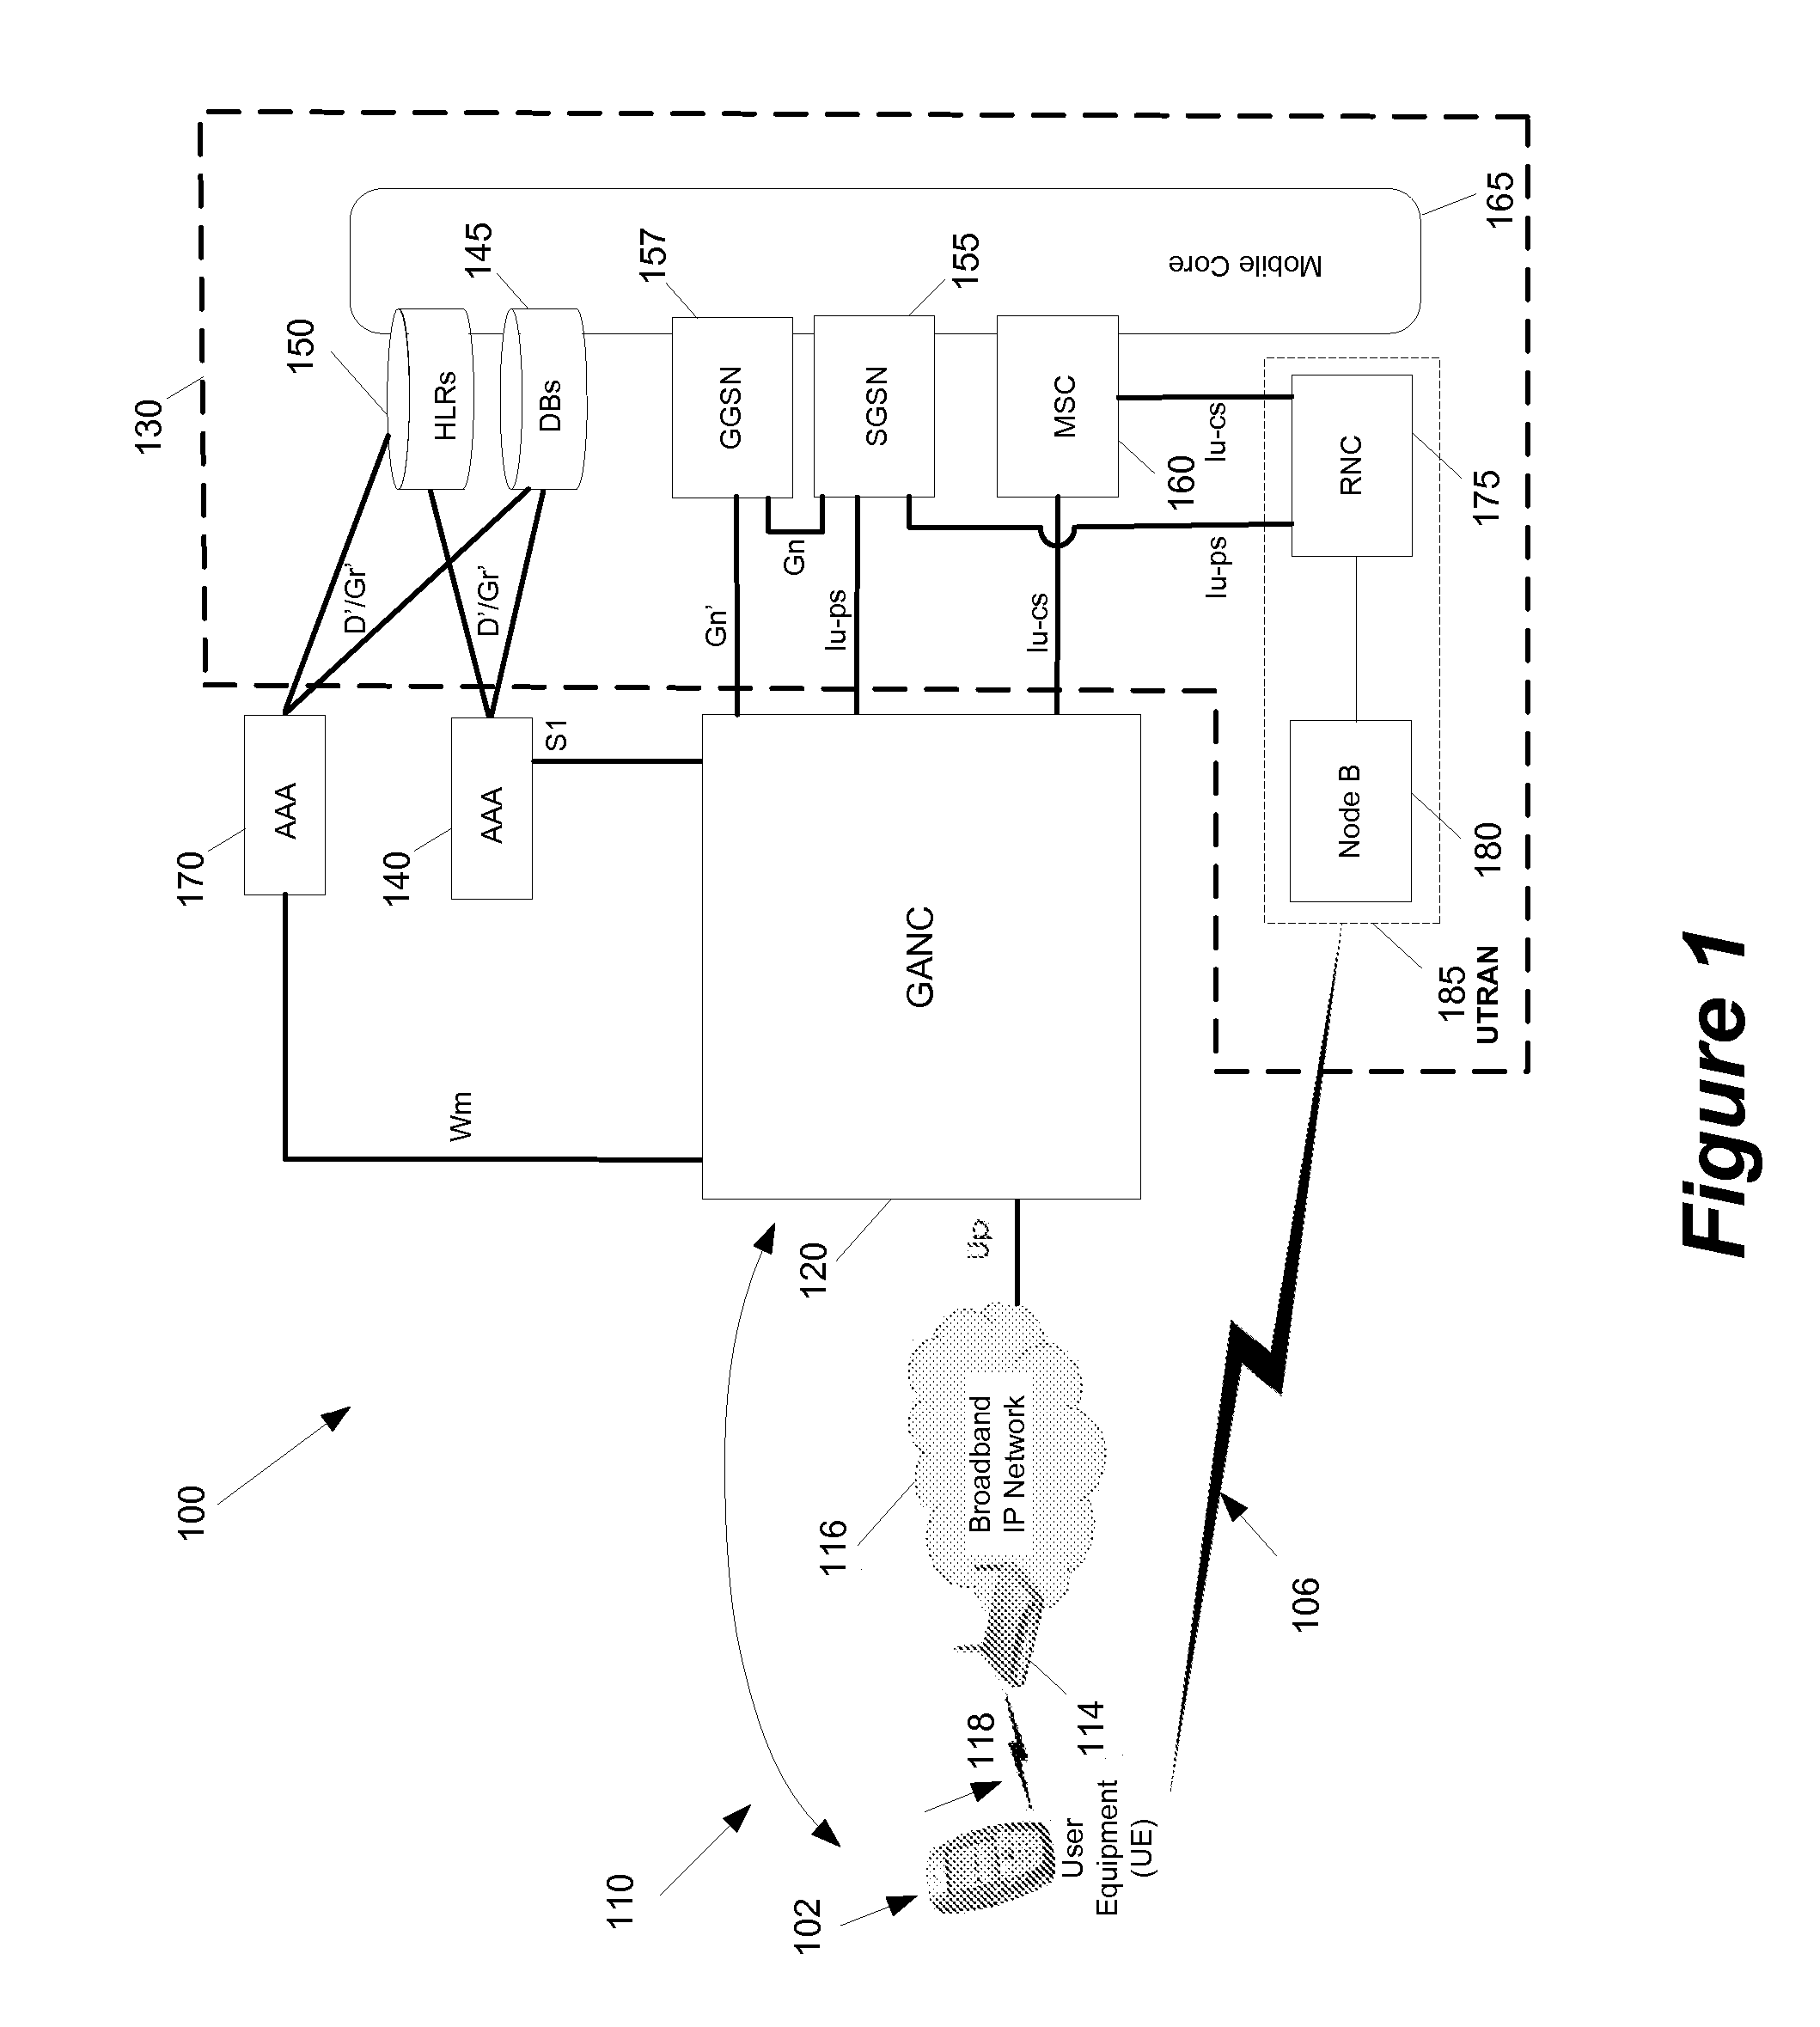 Method and apparatus for discovery